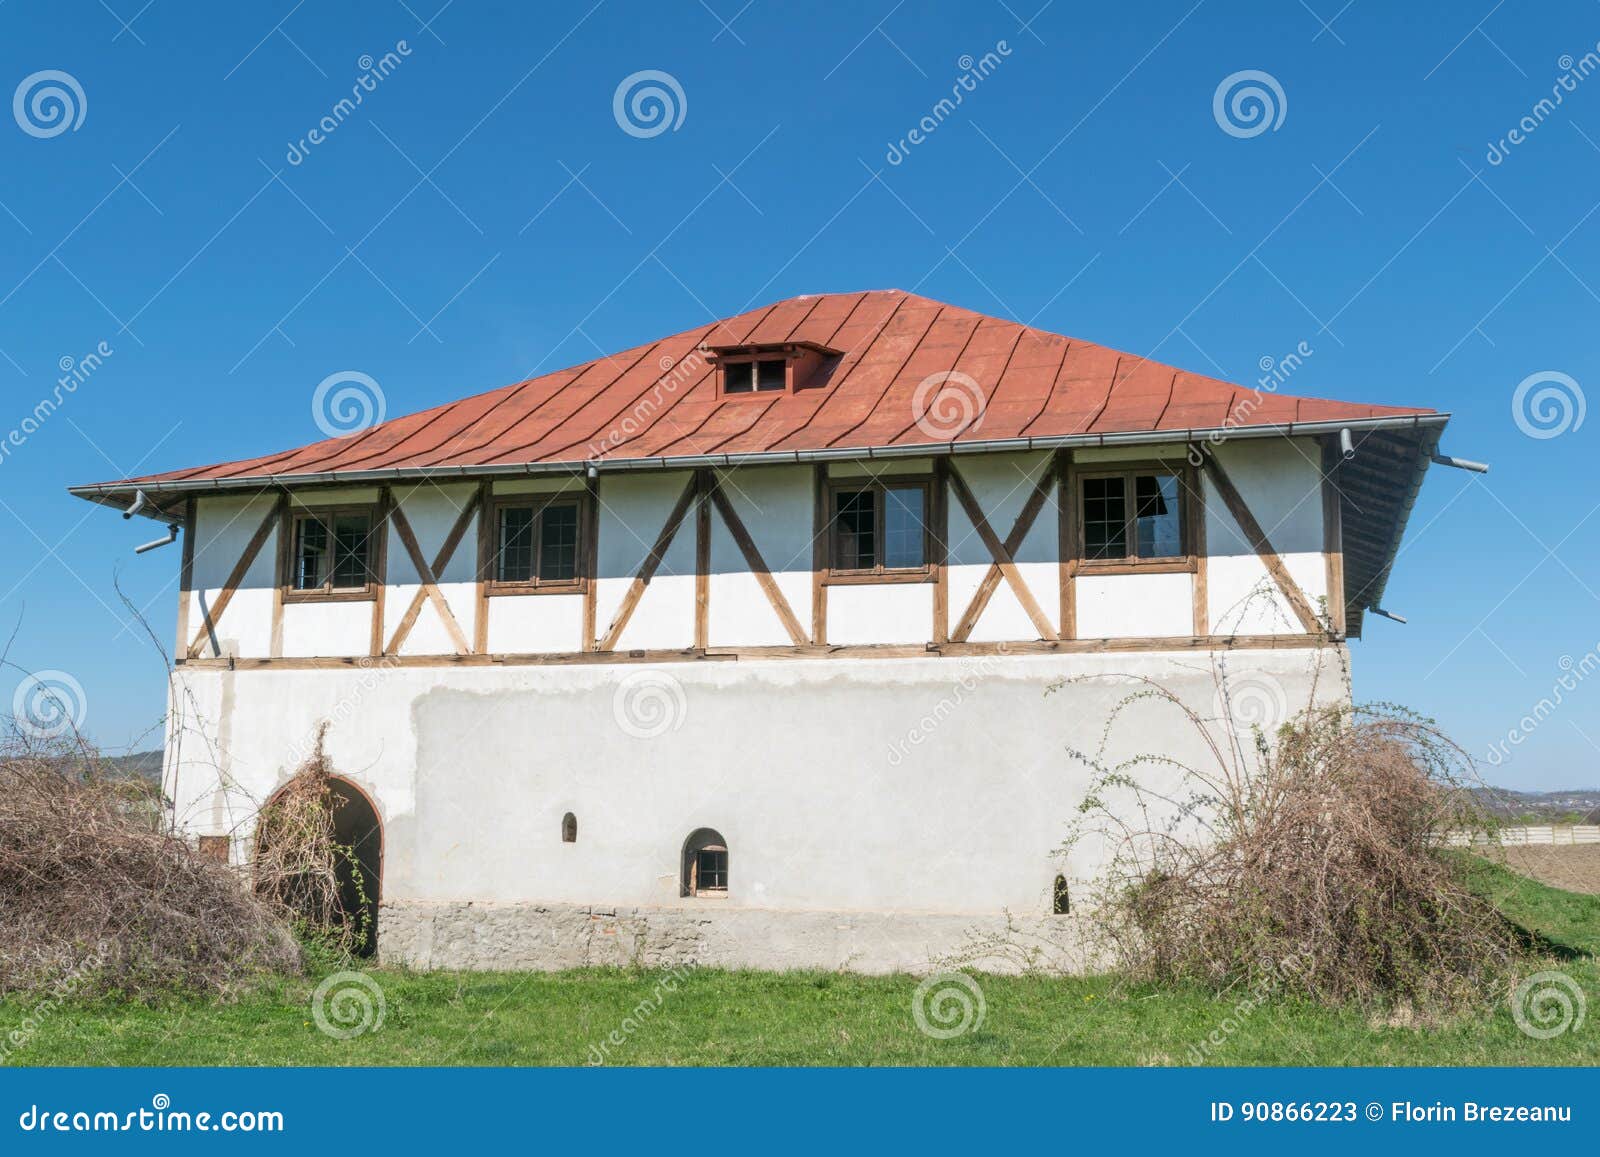 single plain house with intersting wood beans walls and hills in the background